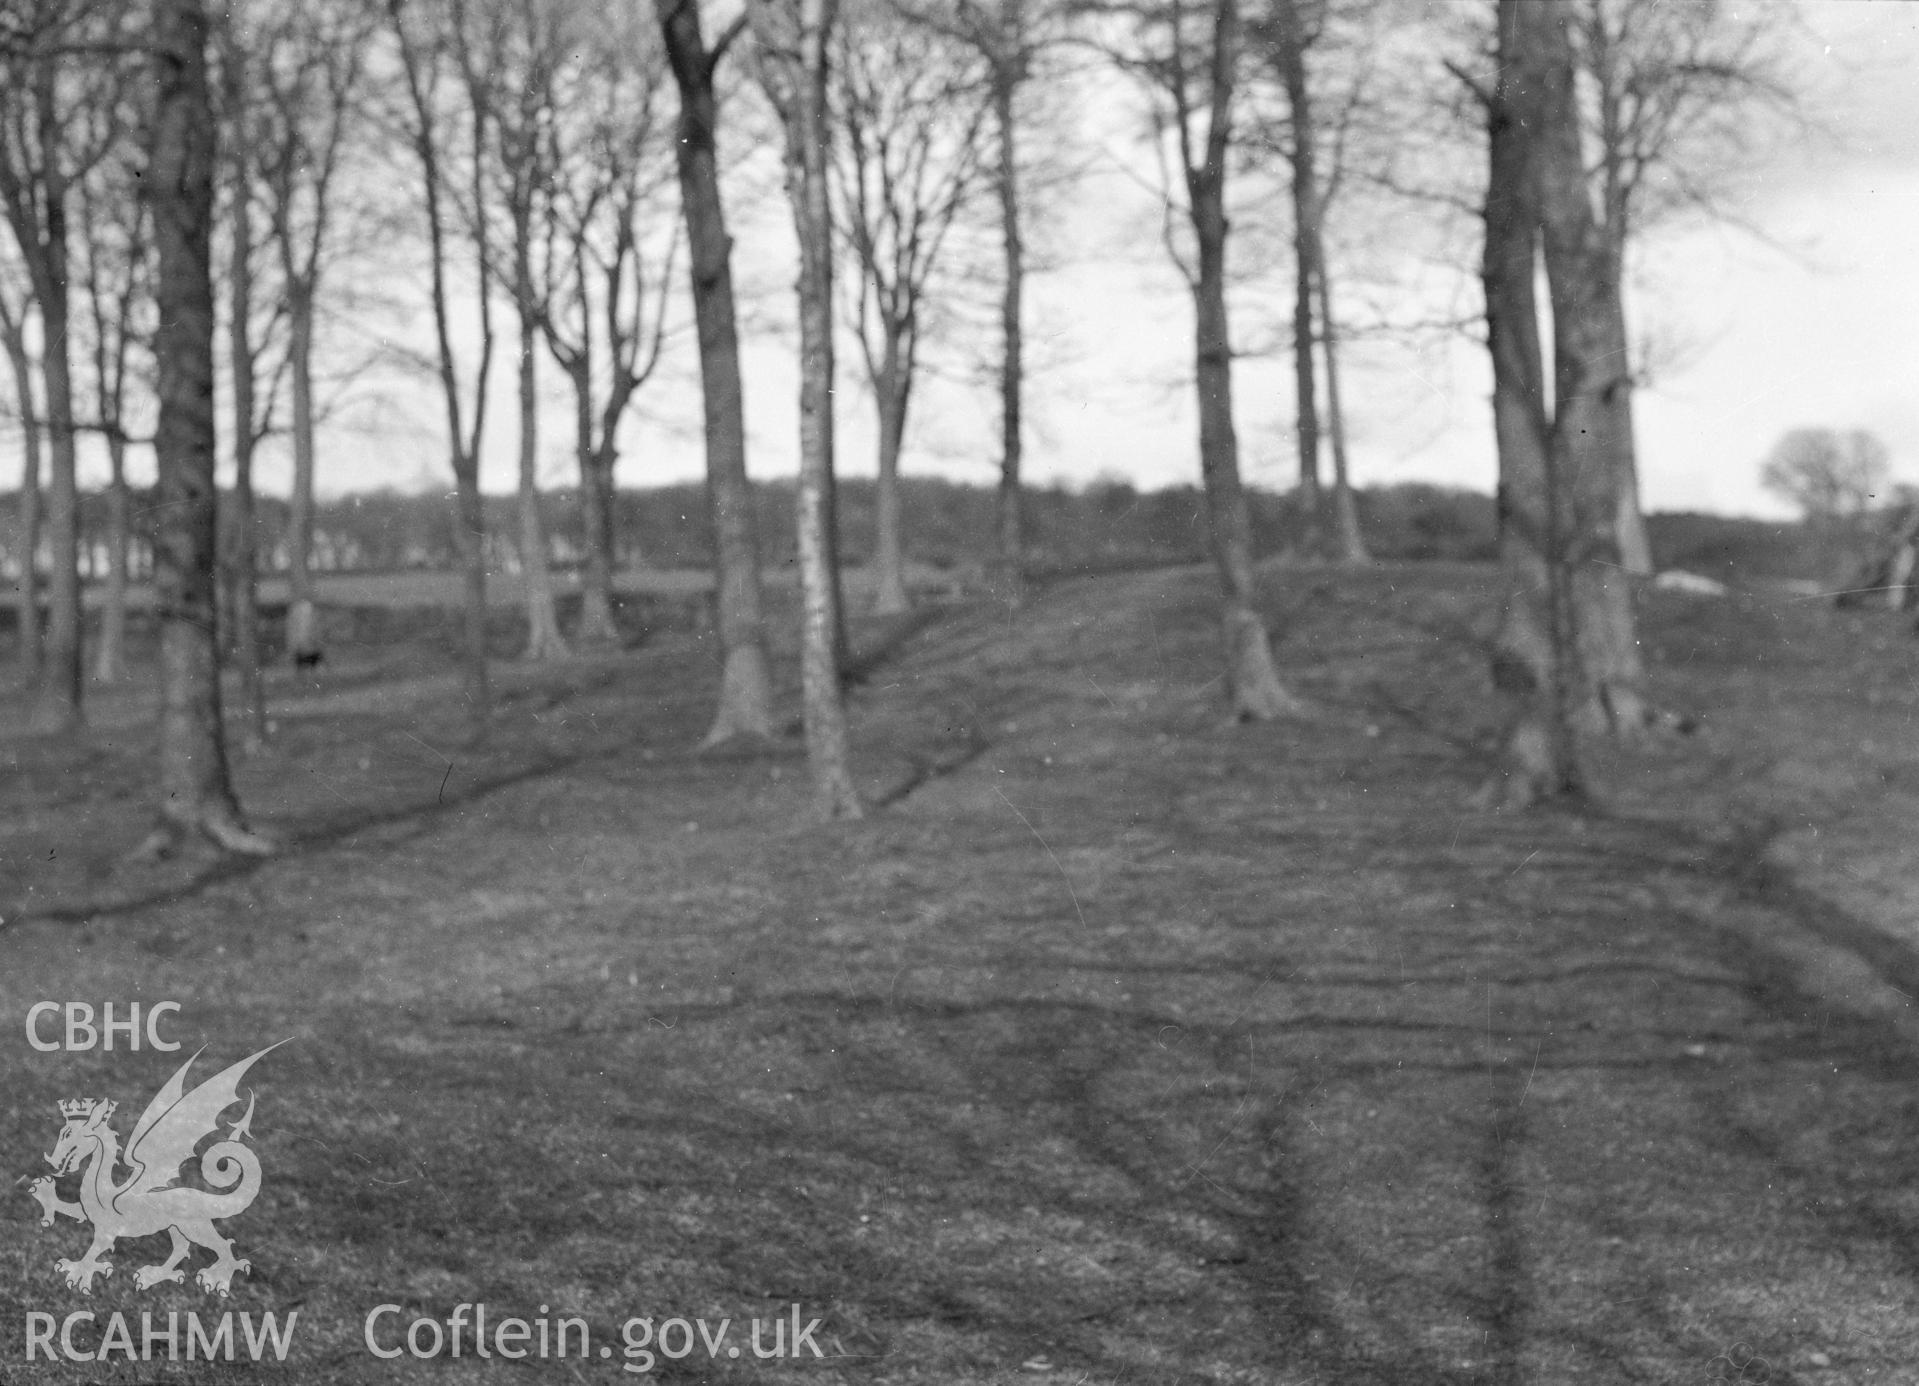 Digital copy of a nitrate negative showing Bryn Digrif Barrows. Transcript of the reverse of the printed photograph: '268. 13 Flint 267 Whitford (1)/ near Bryn Covert [?] Bryn Digrif (4) Tumulus.' From the Cadw Monuments in Care Collection.